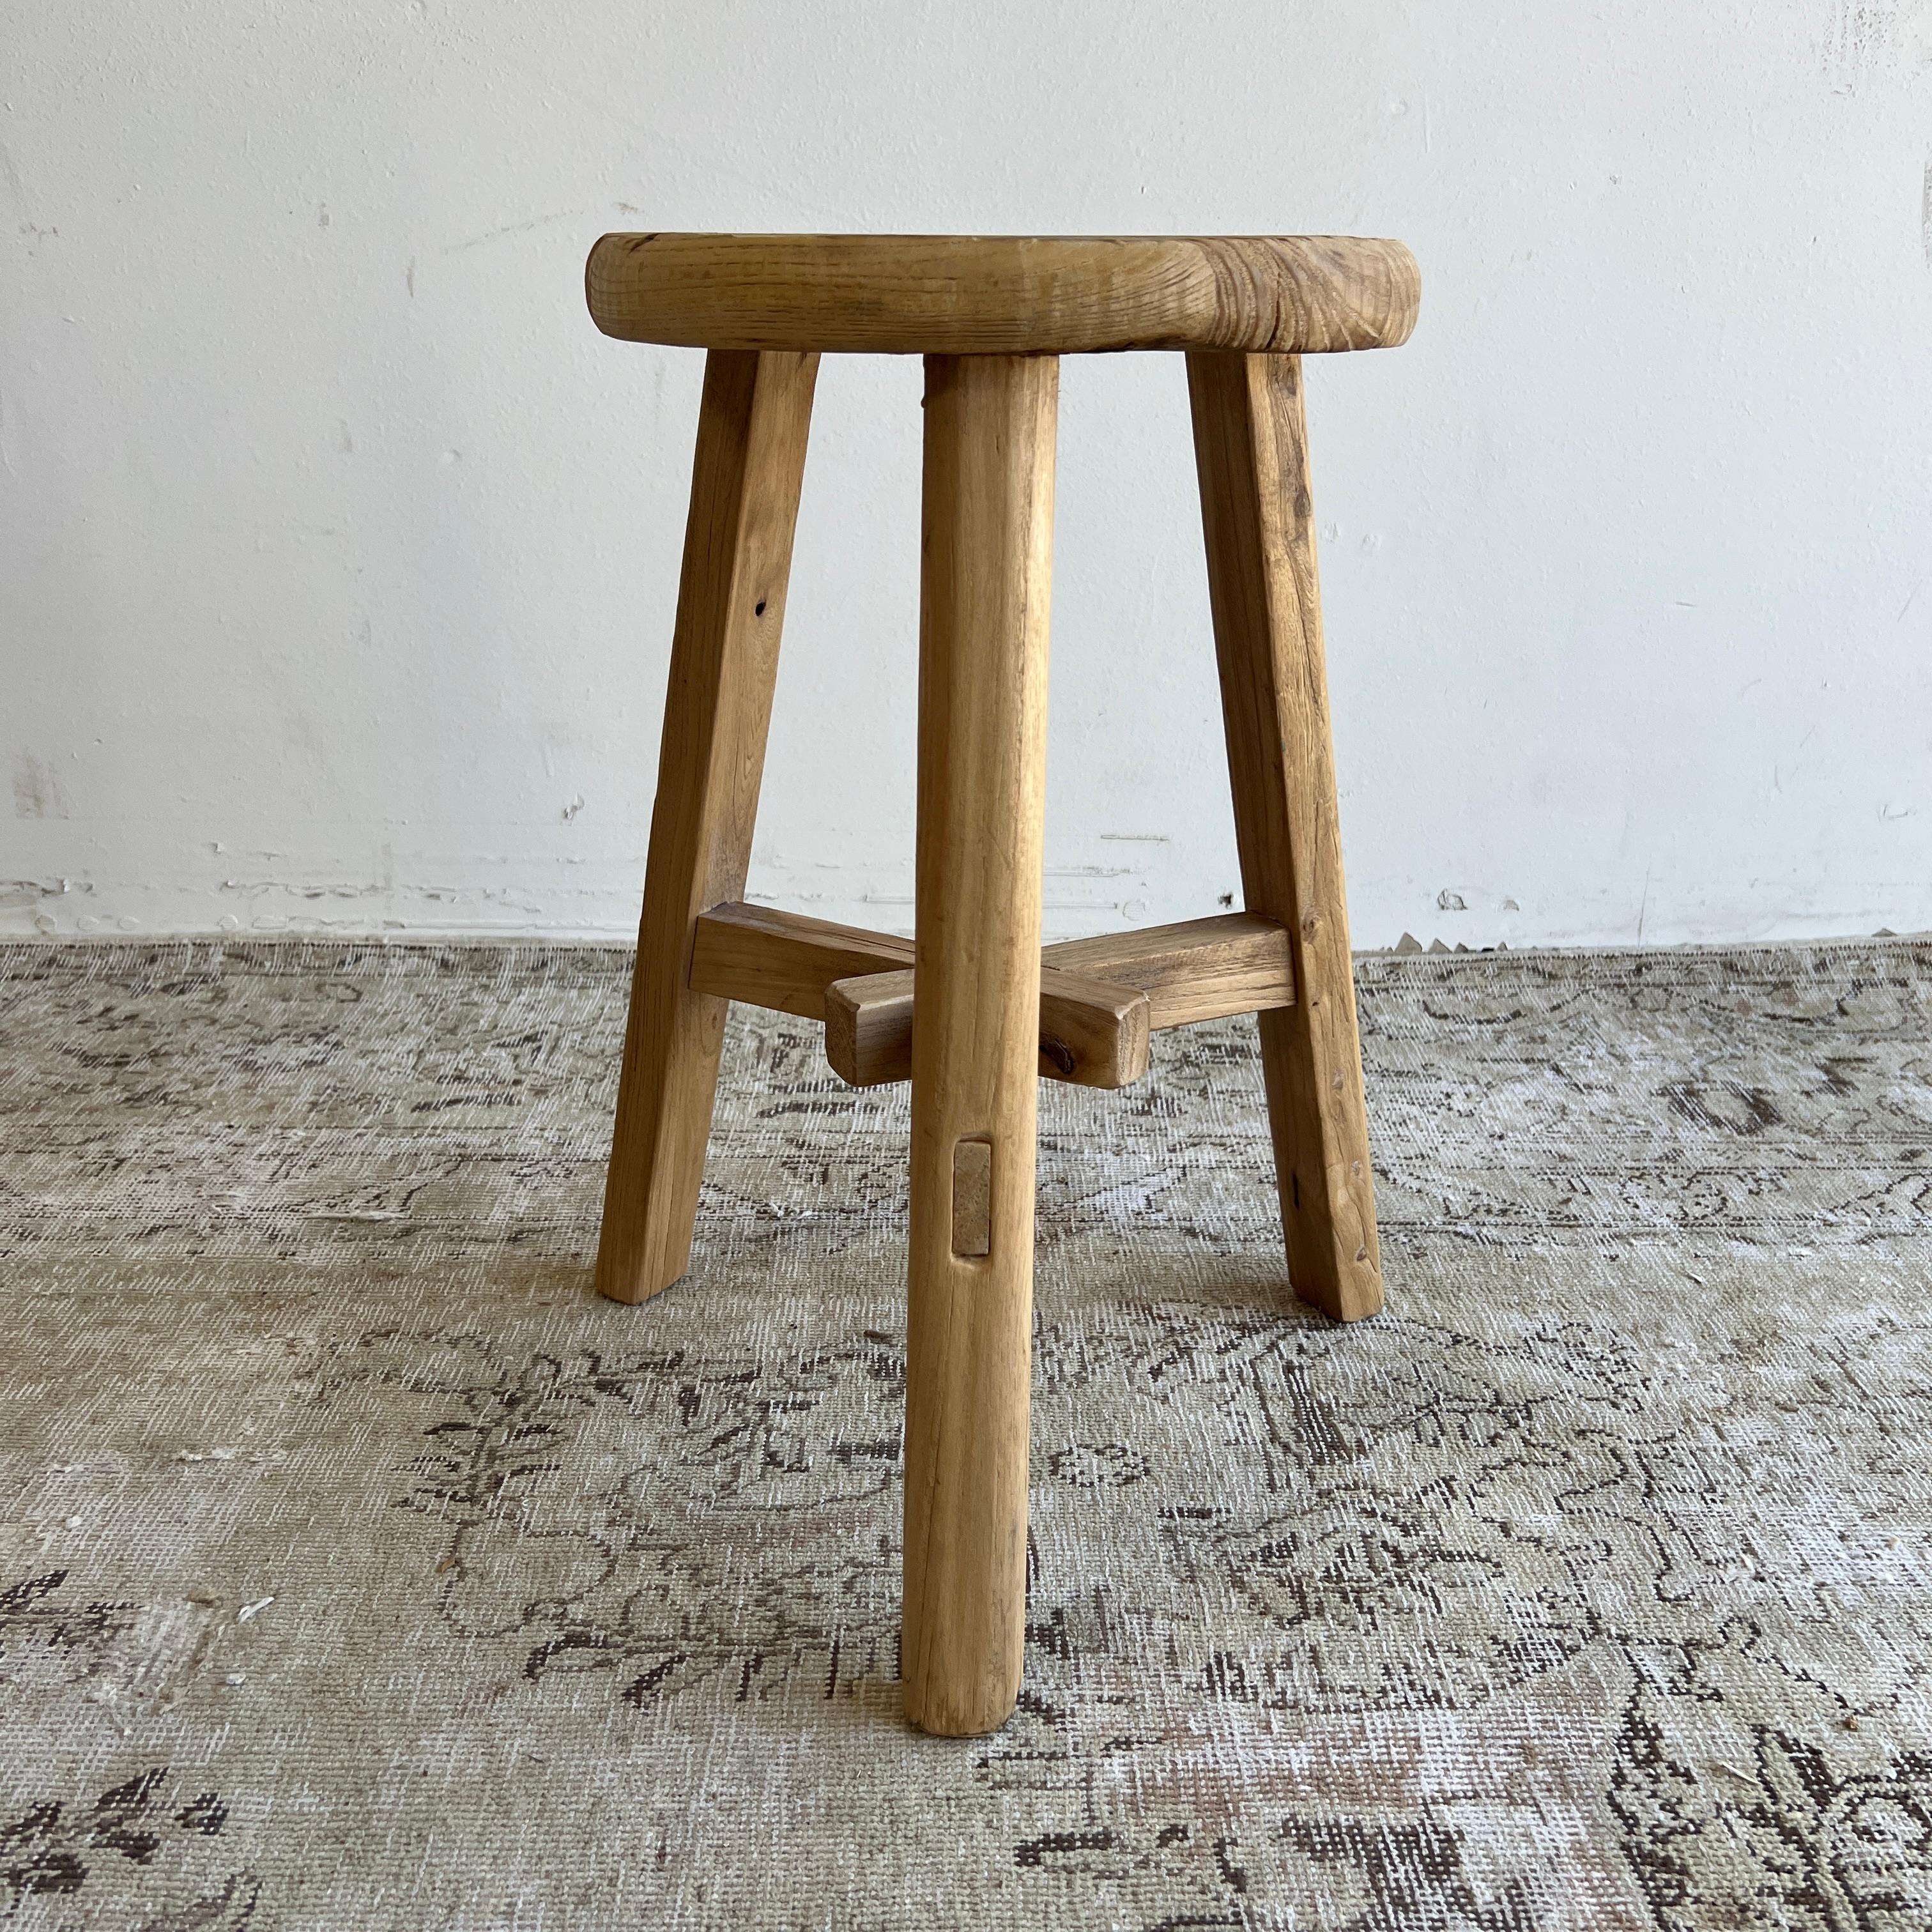 These are the real vintage antique elm wood stools! Beautiful antique patina, with weathering and age, these are solid and sturdy ready for daily use, use as a table, stool, drink table, they are great for any space.
Size: 15